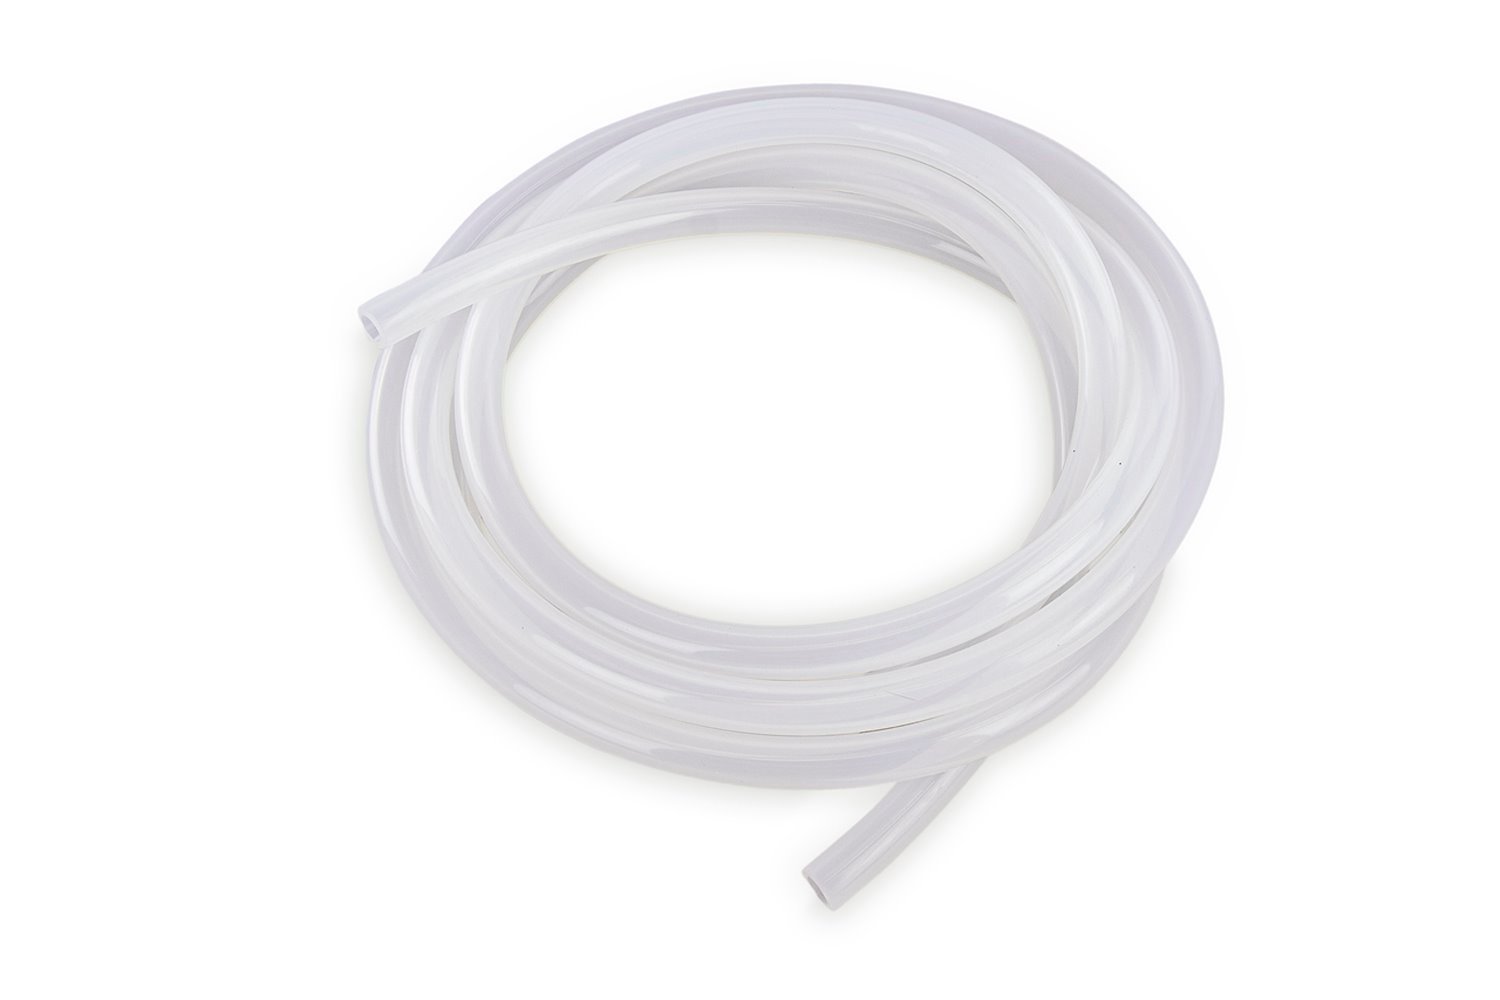 HTSVH2-CLEARx5 High-Temperature Silicone Vacuum Hose Tubing, 5/64 in. ID, 5 ft. Roll, Clear